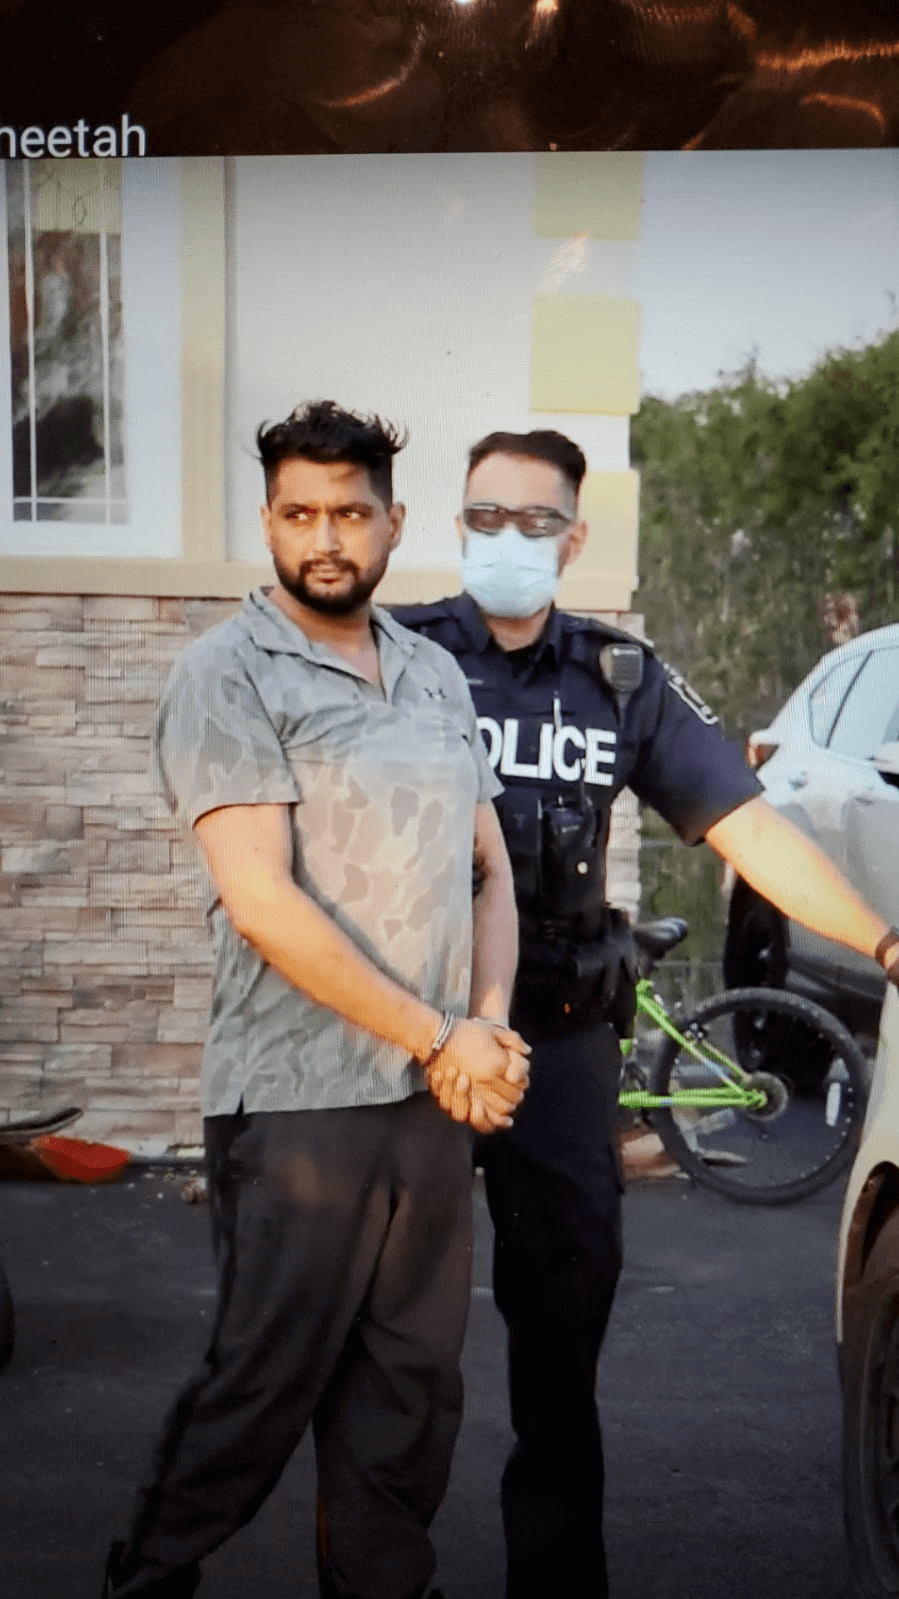 INTERNATIONAL DRUG RACKET: Dozens of South Asians Among 33 People Charged In Ontario Drug Bust